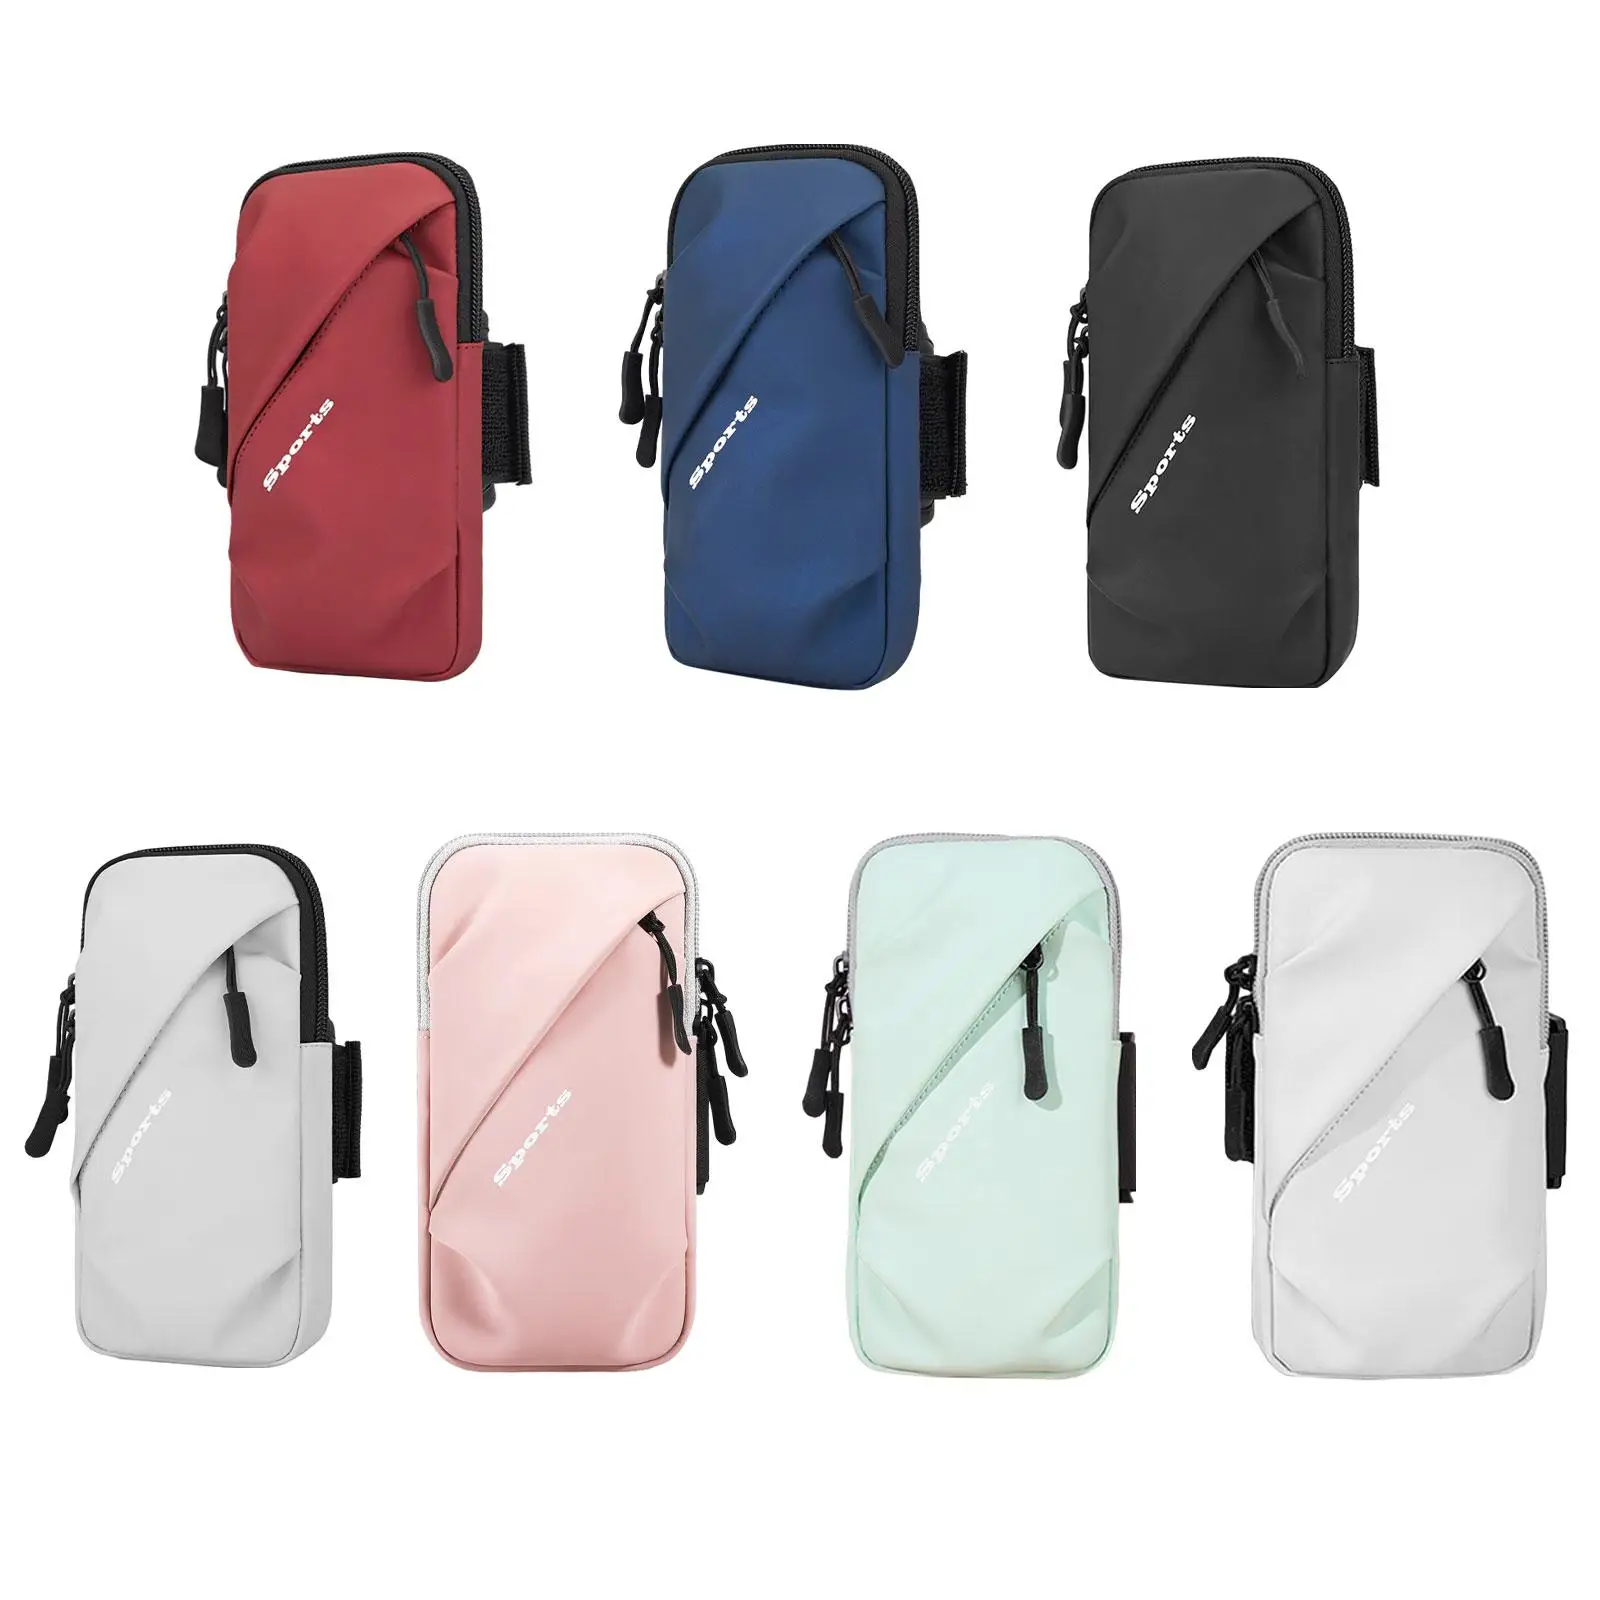 Phone Armband Bag Cellphone Holder Phone Wristband for Jogging Sport Workout